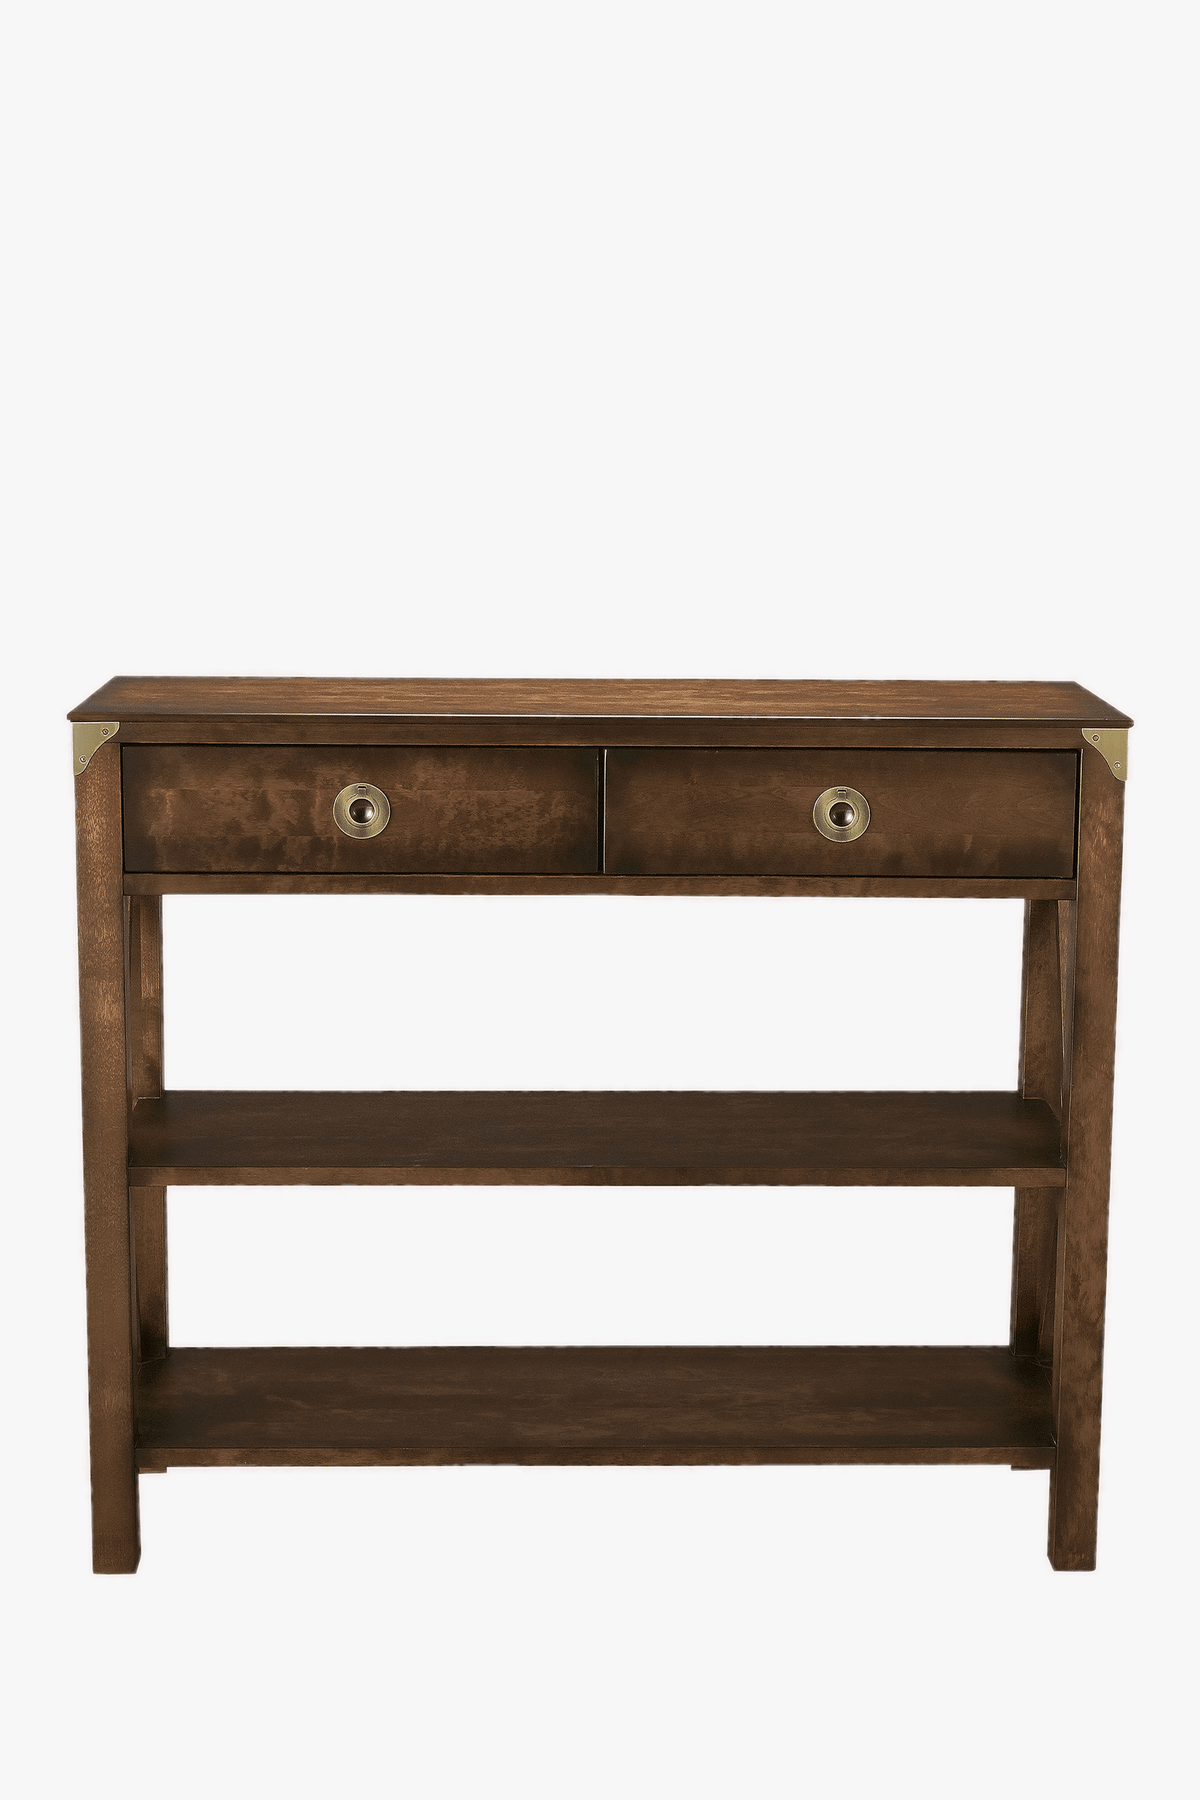 Balmoral 2 Drawer Console Table